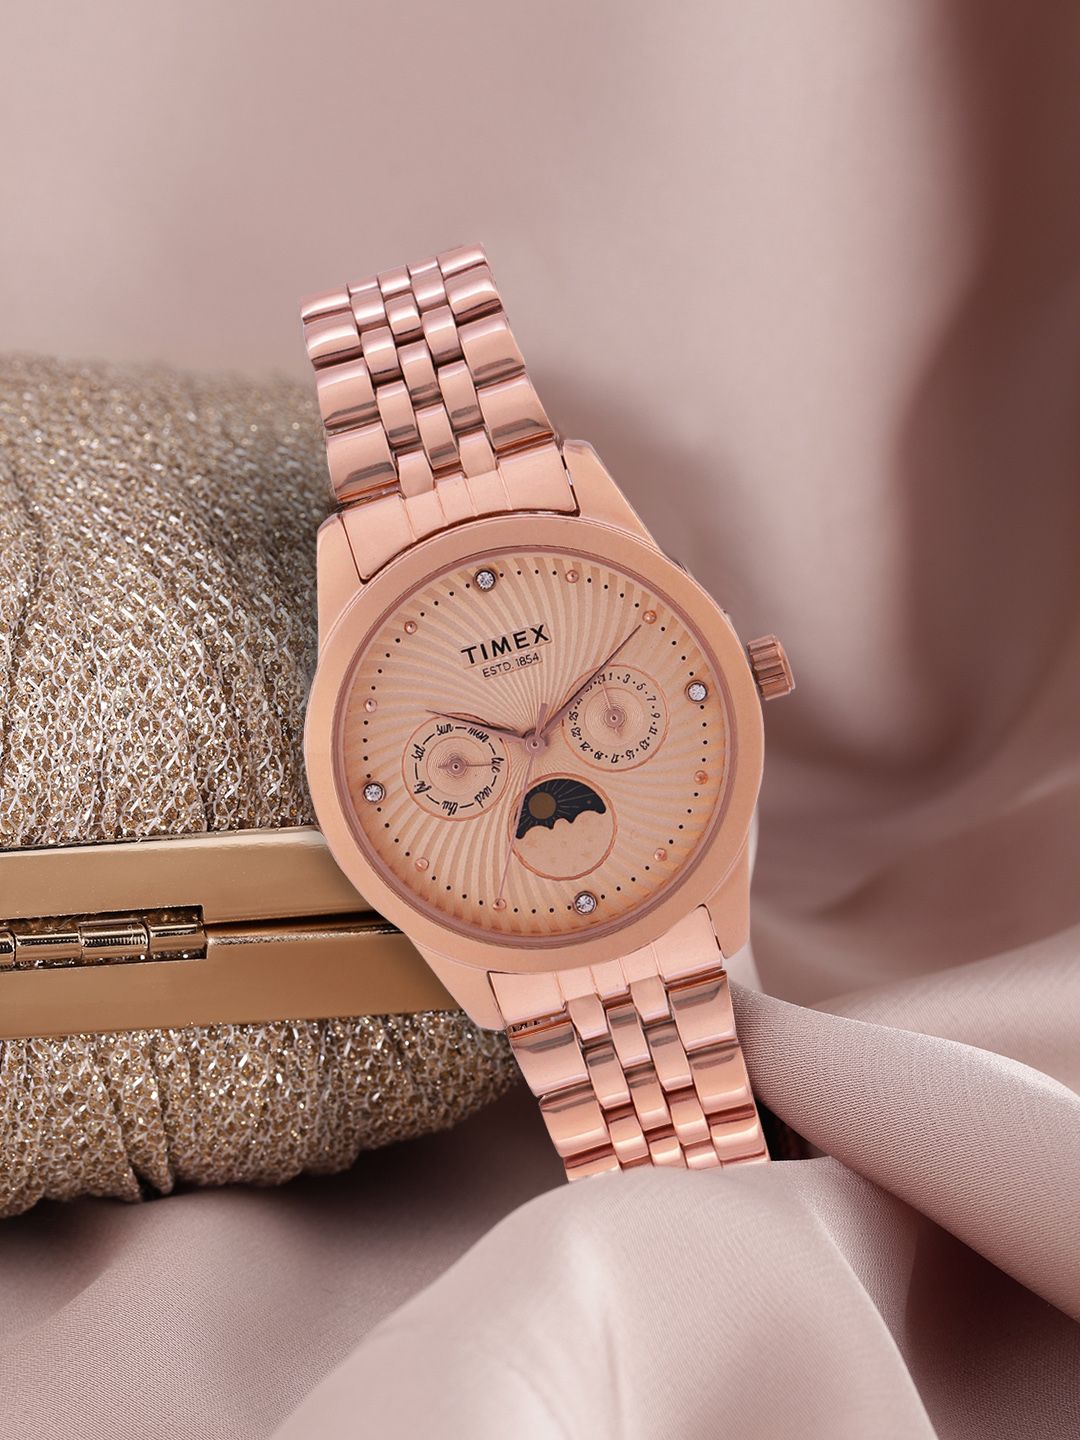 Timex Women Rose Gold-Toned Multifunction Analogue Watch - TWEL13105 Price in India